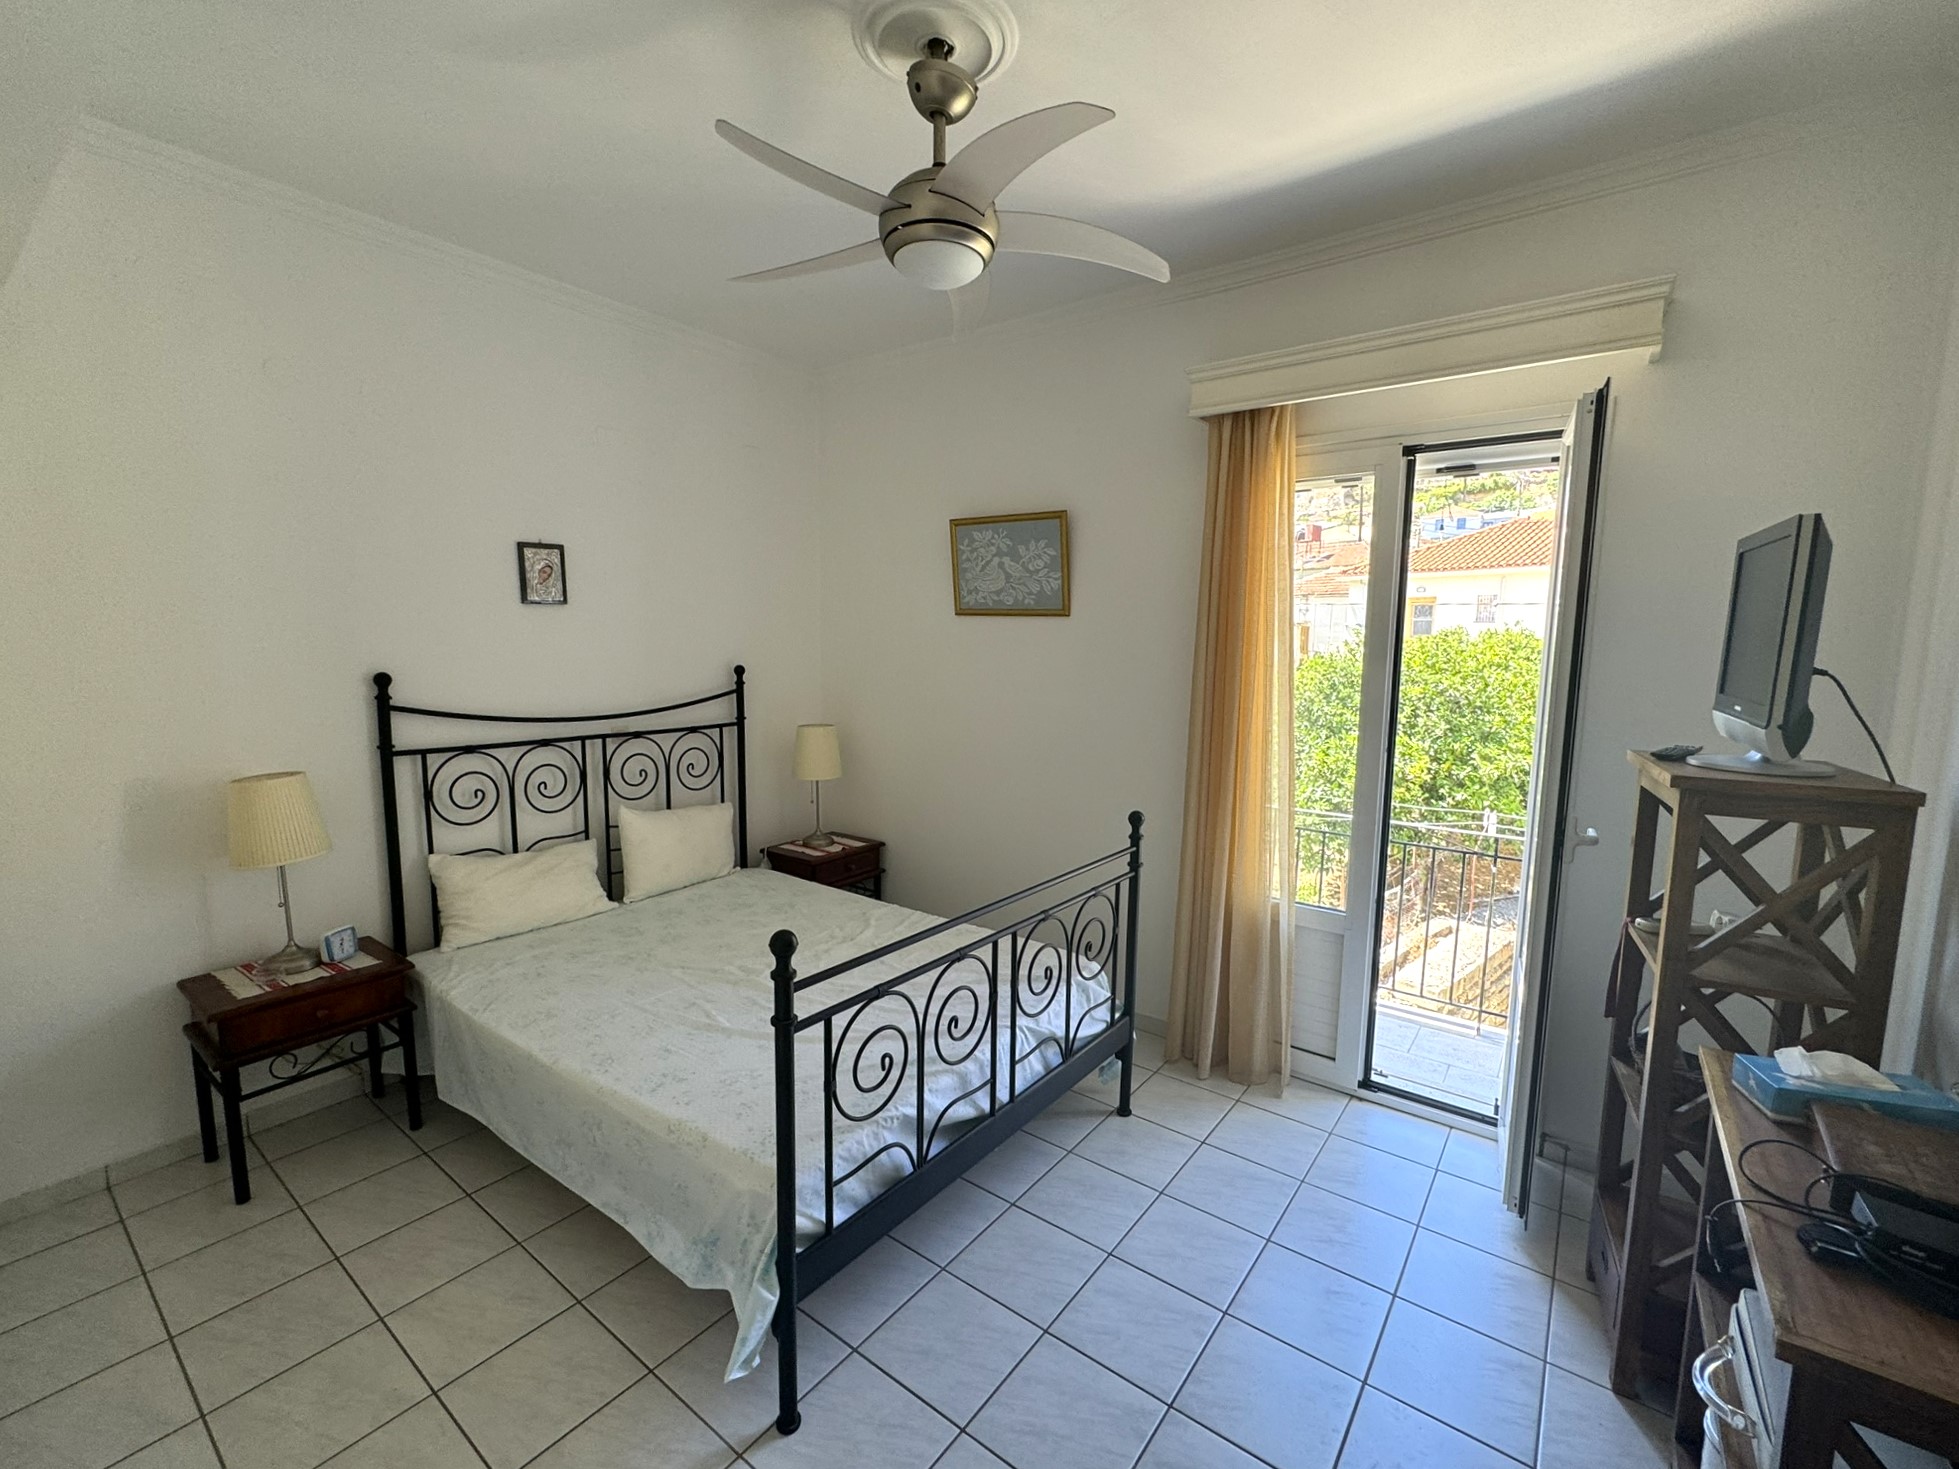 Bedroom of house for sale in Ithaca Greece Vathi